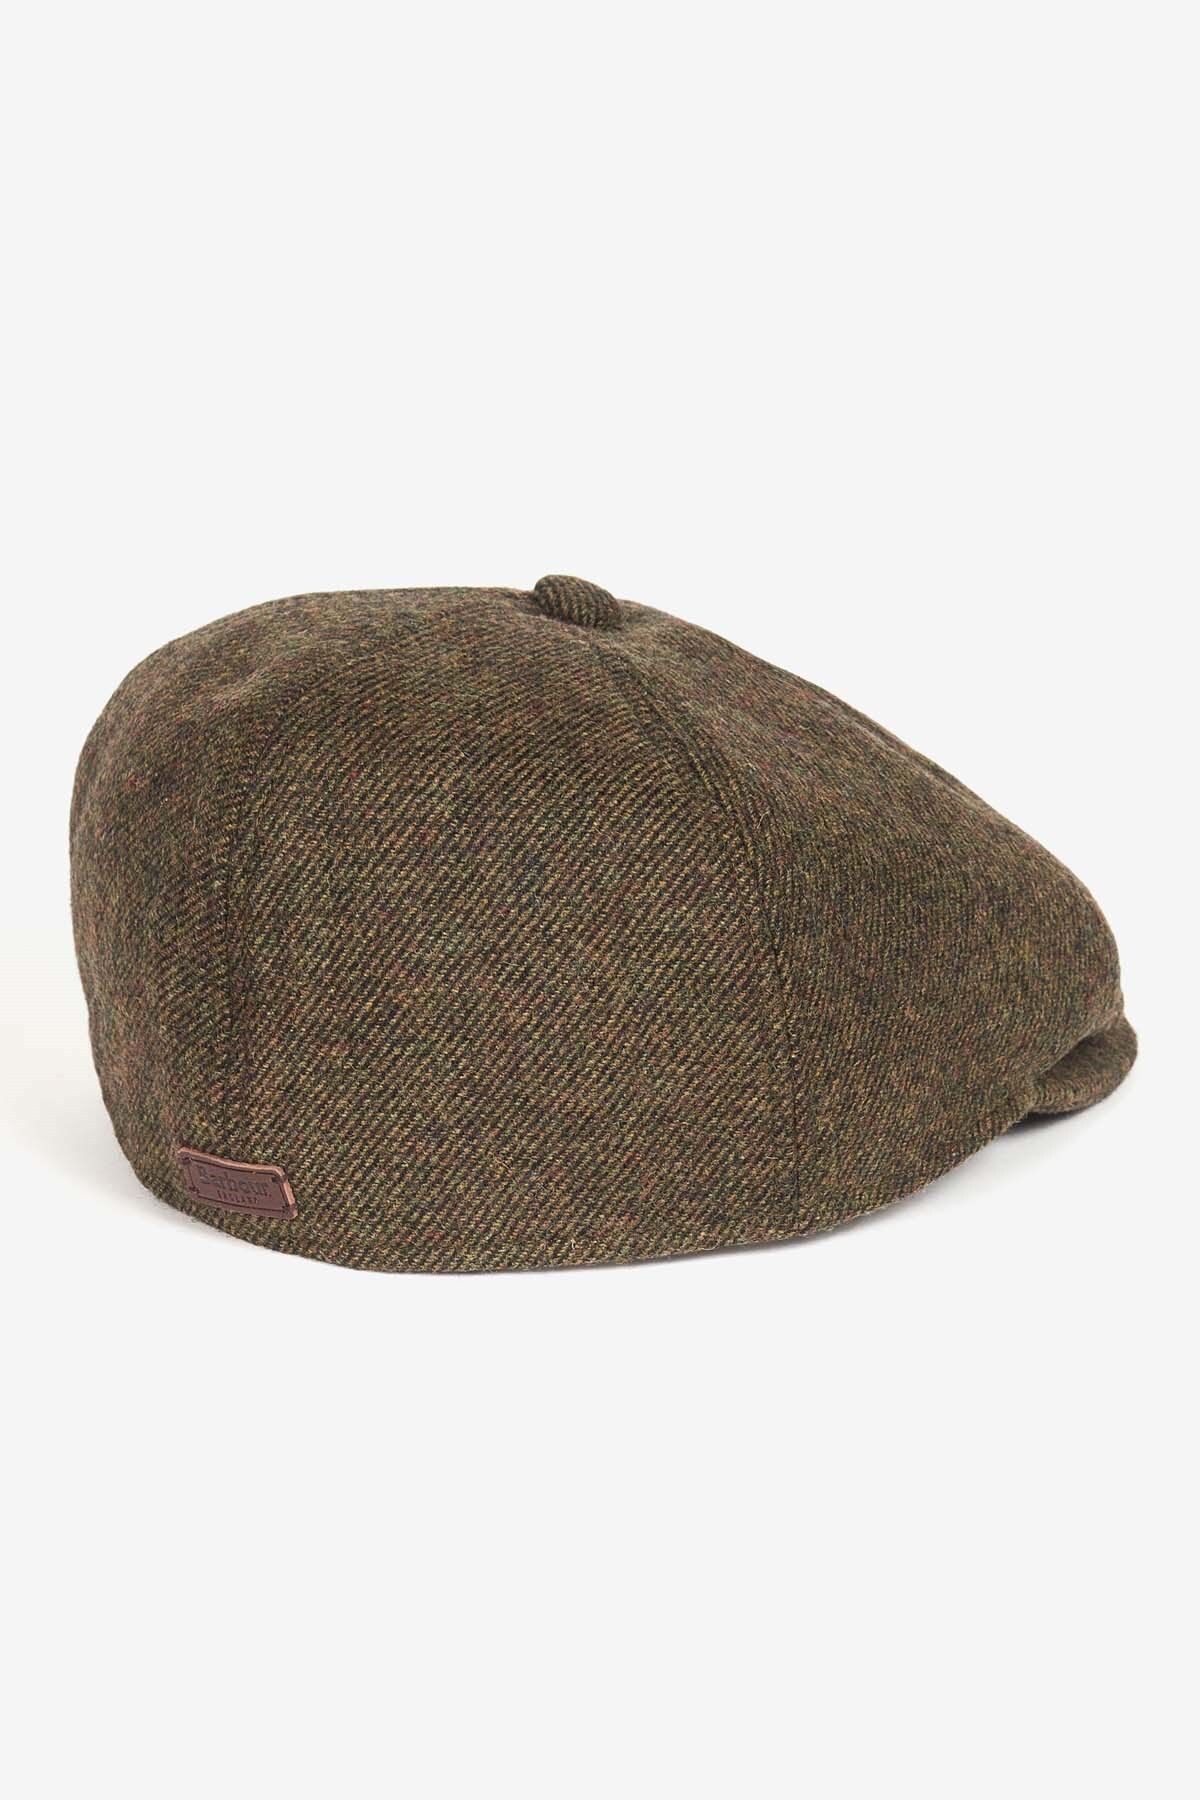 Barbour Claymore Baker Hat OL51 Twill Olive